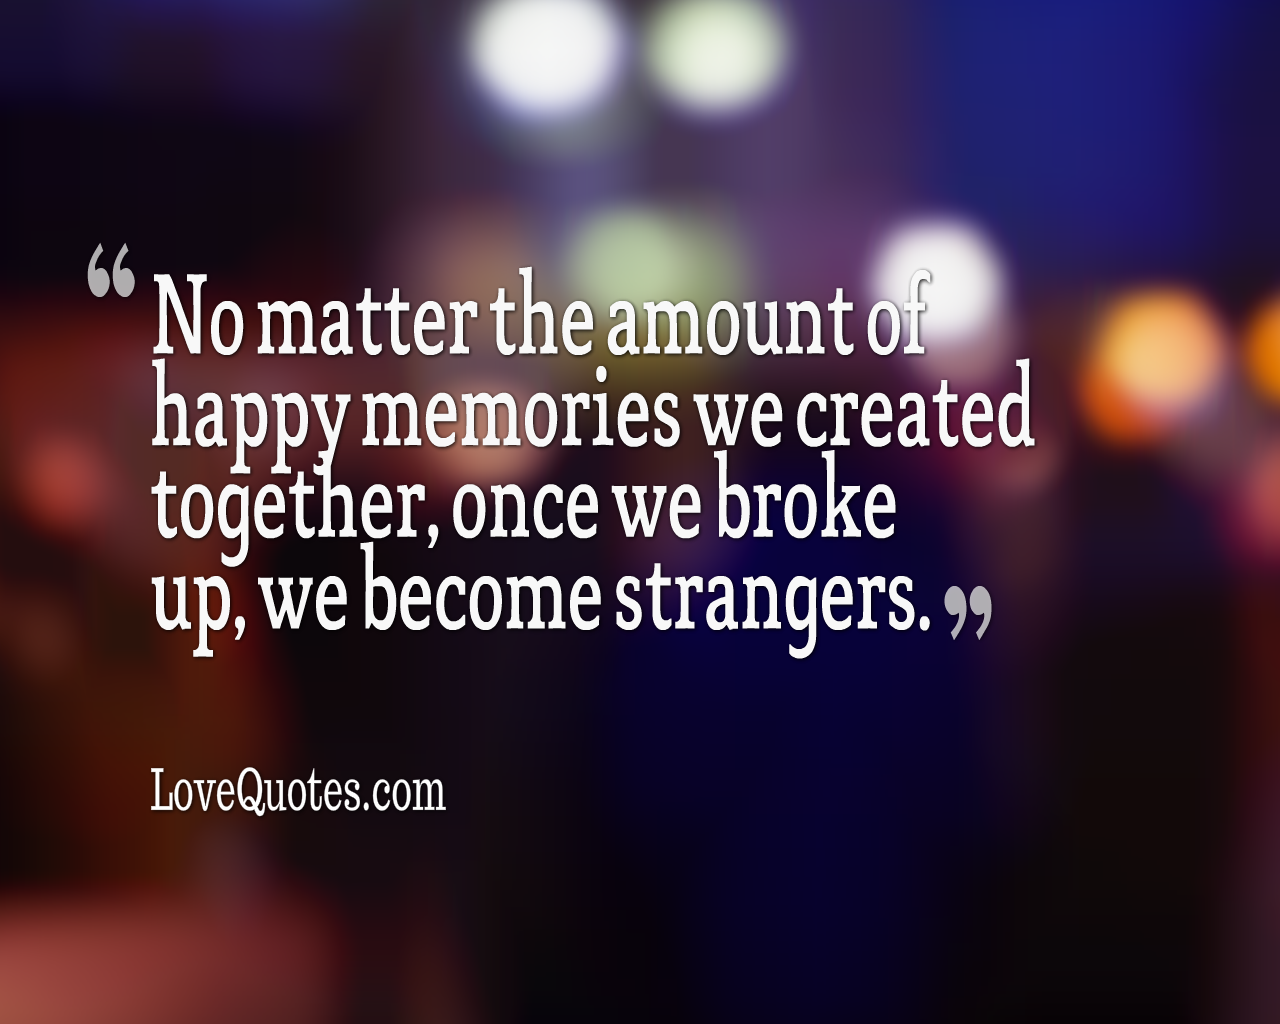 We Become Strangers